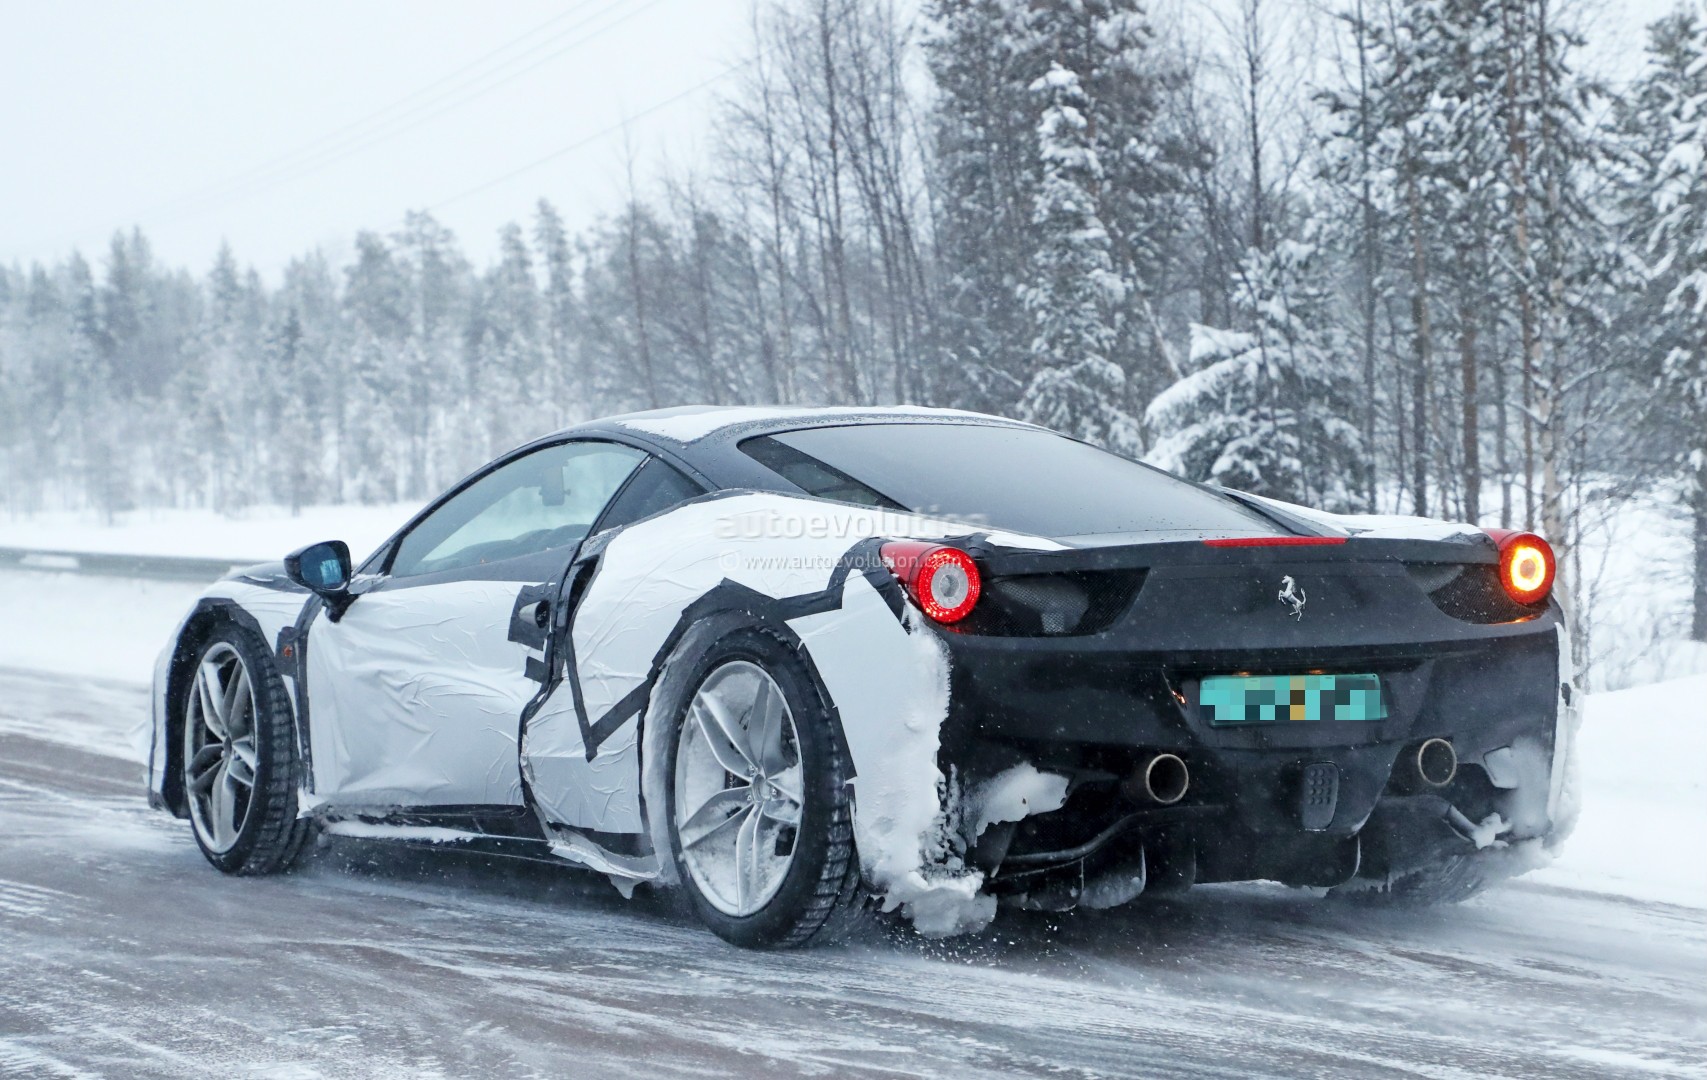 2019 - [Ferrari] Roma [F169] - Page 2 New-ferrari-dino-spied-testing-in-sweden-as-458-test-mule-with-v6-soundtrack_10